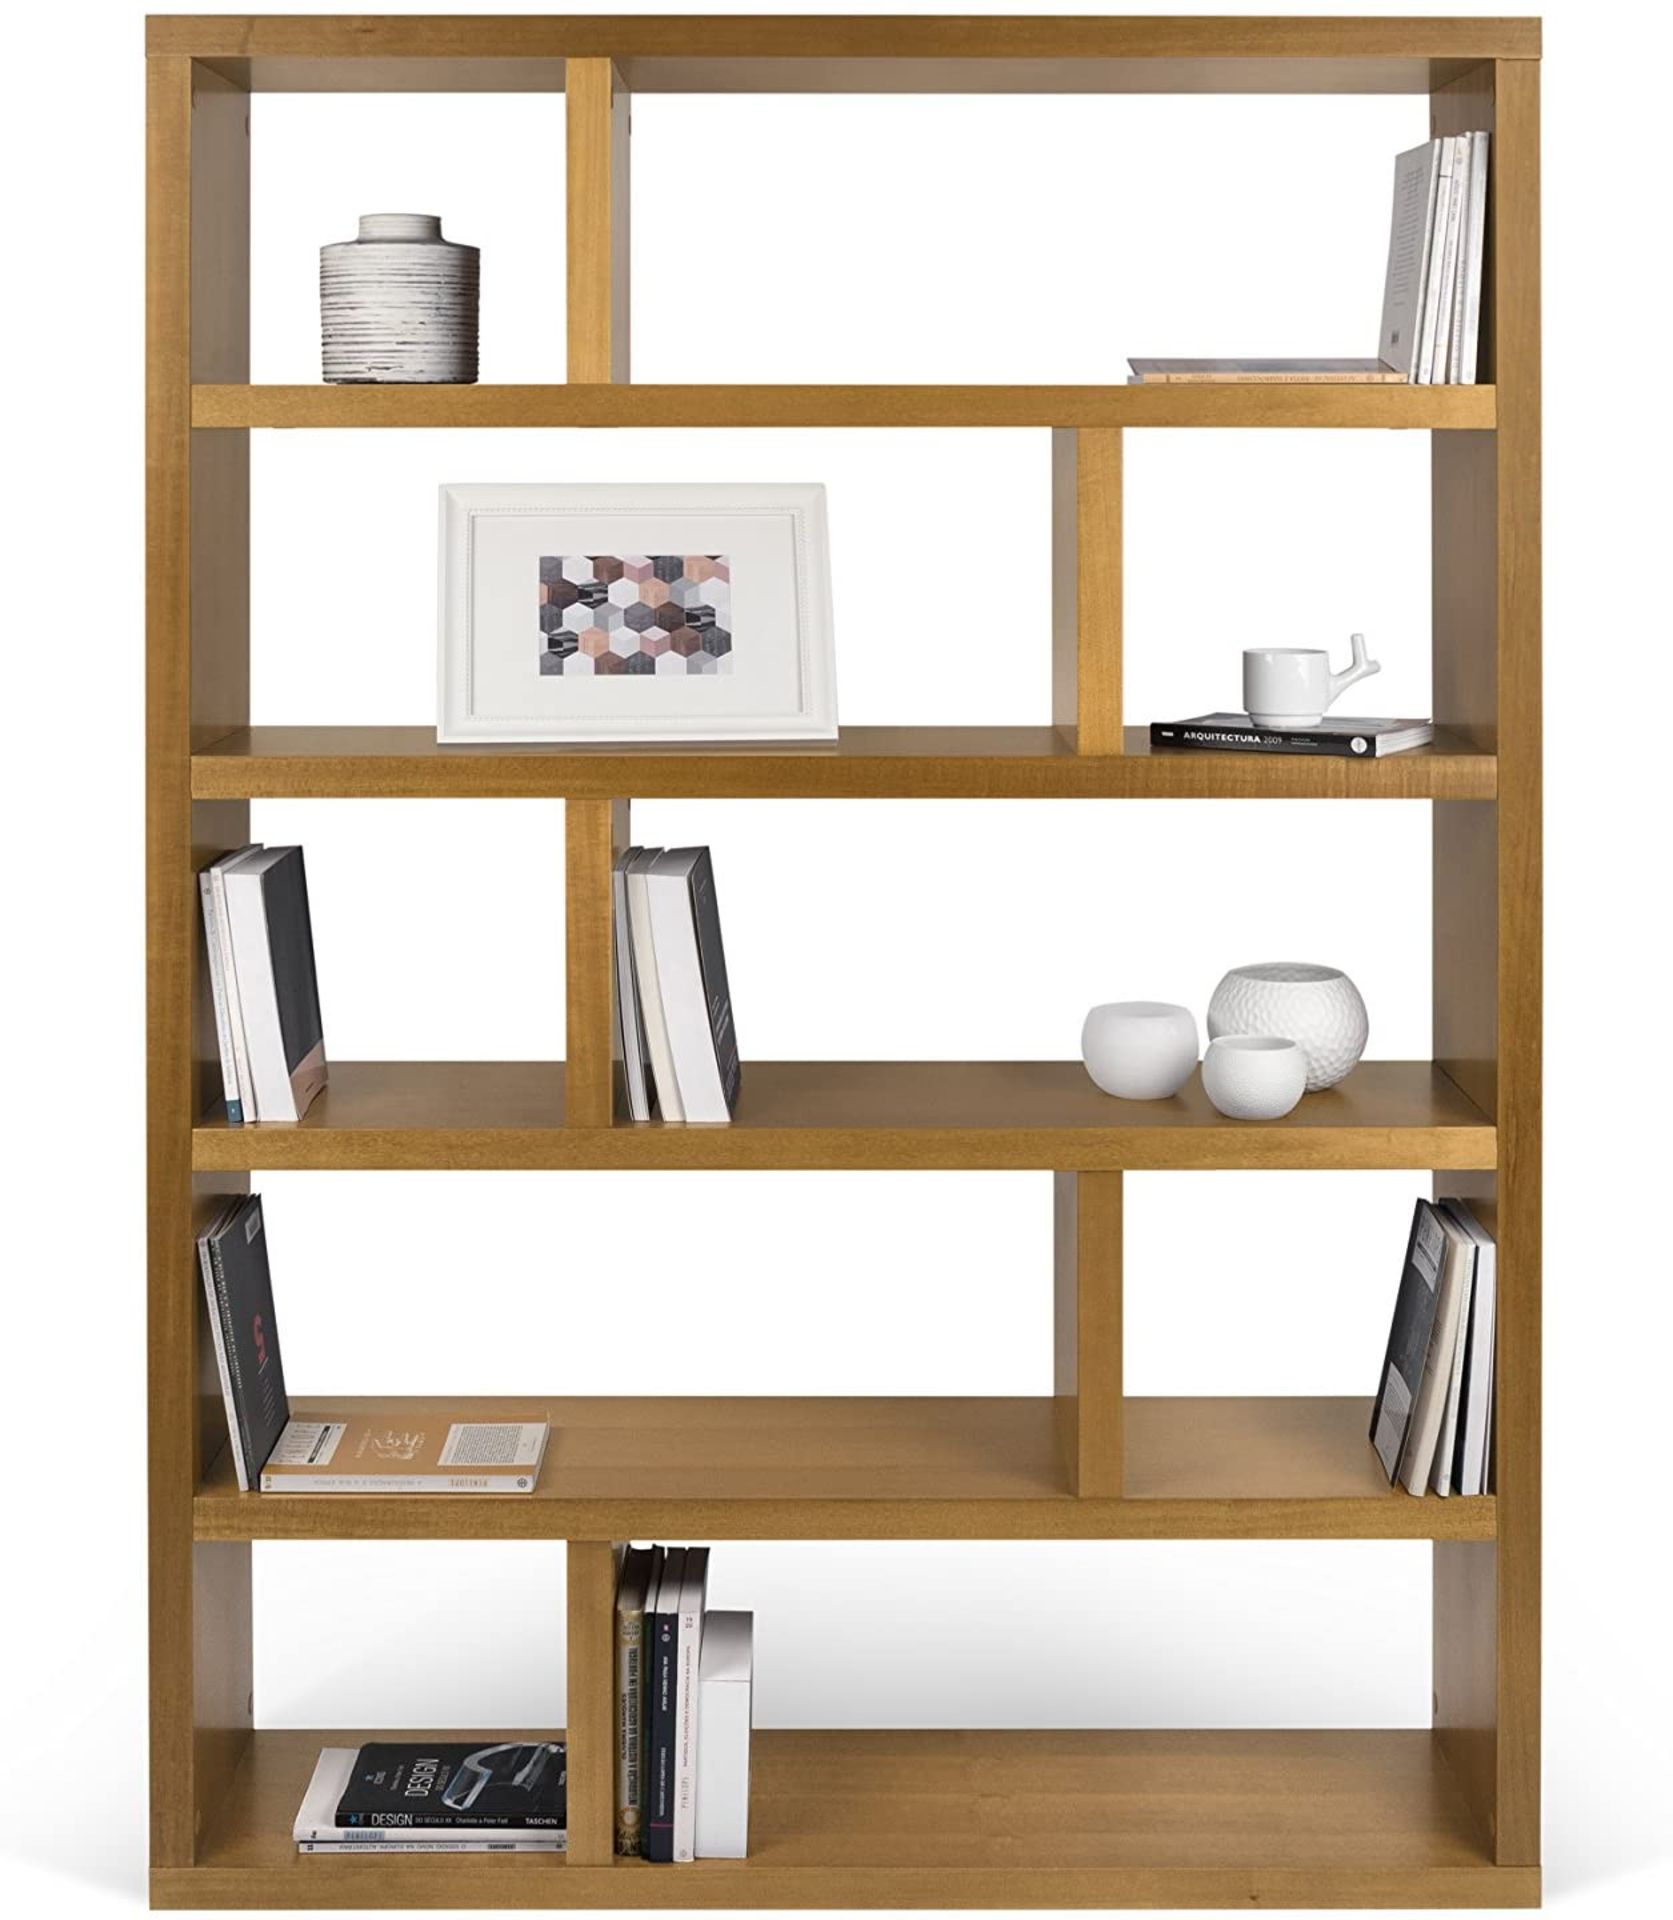 1 x Comtempoary High Shelving Unit - Mukali - Dimensions: 47W x 11D x 68H Inches - New Boxed Stock